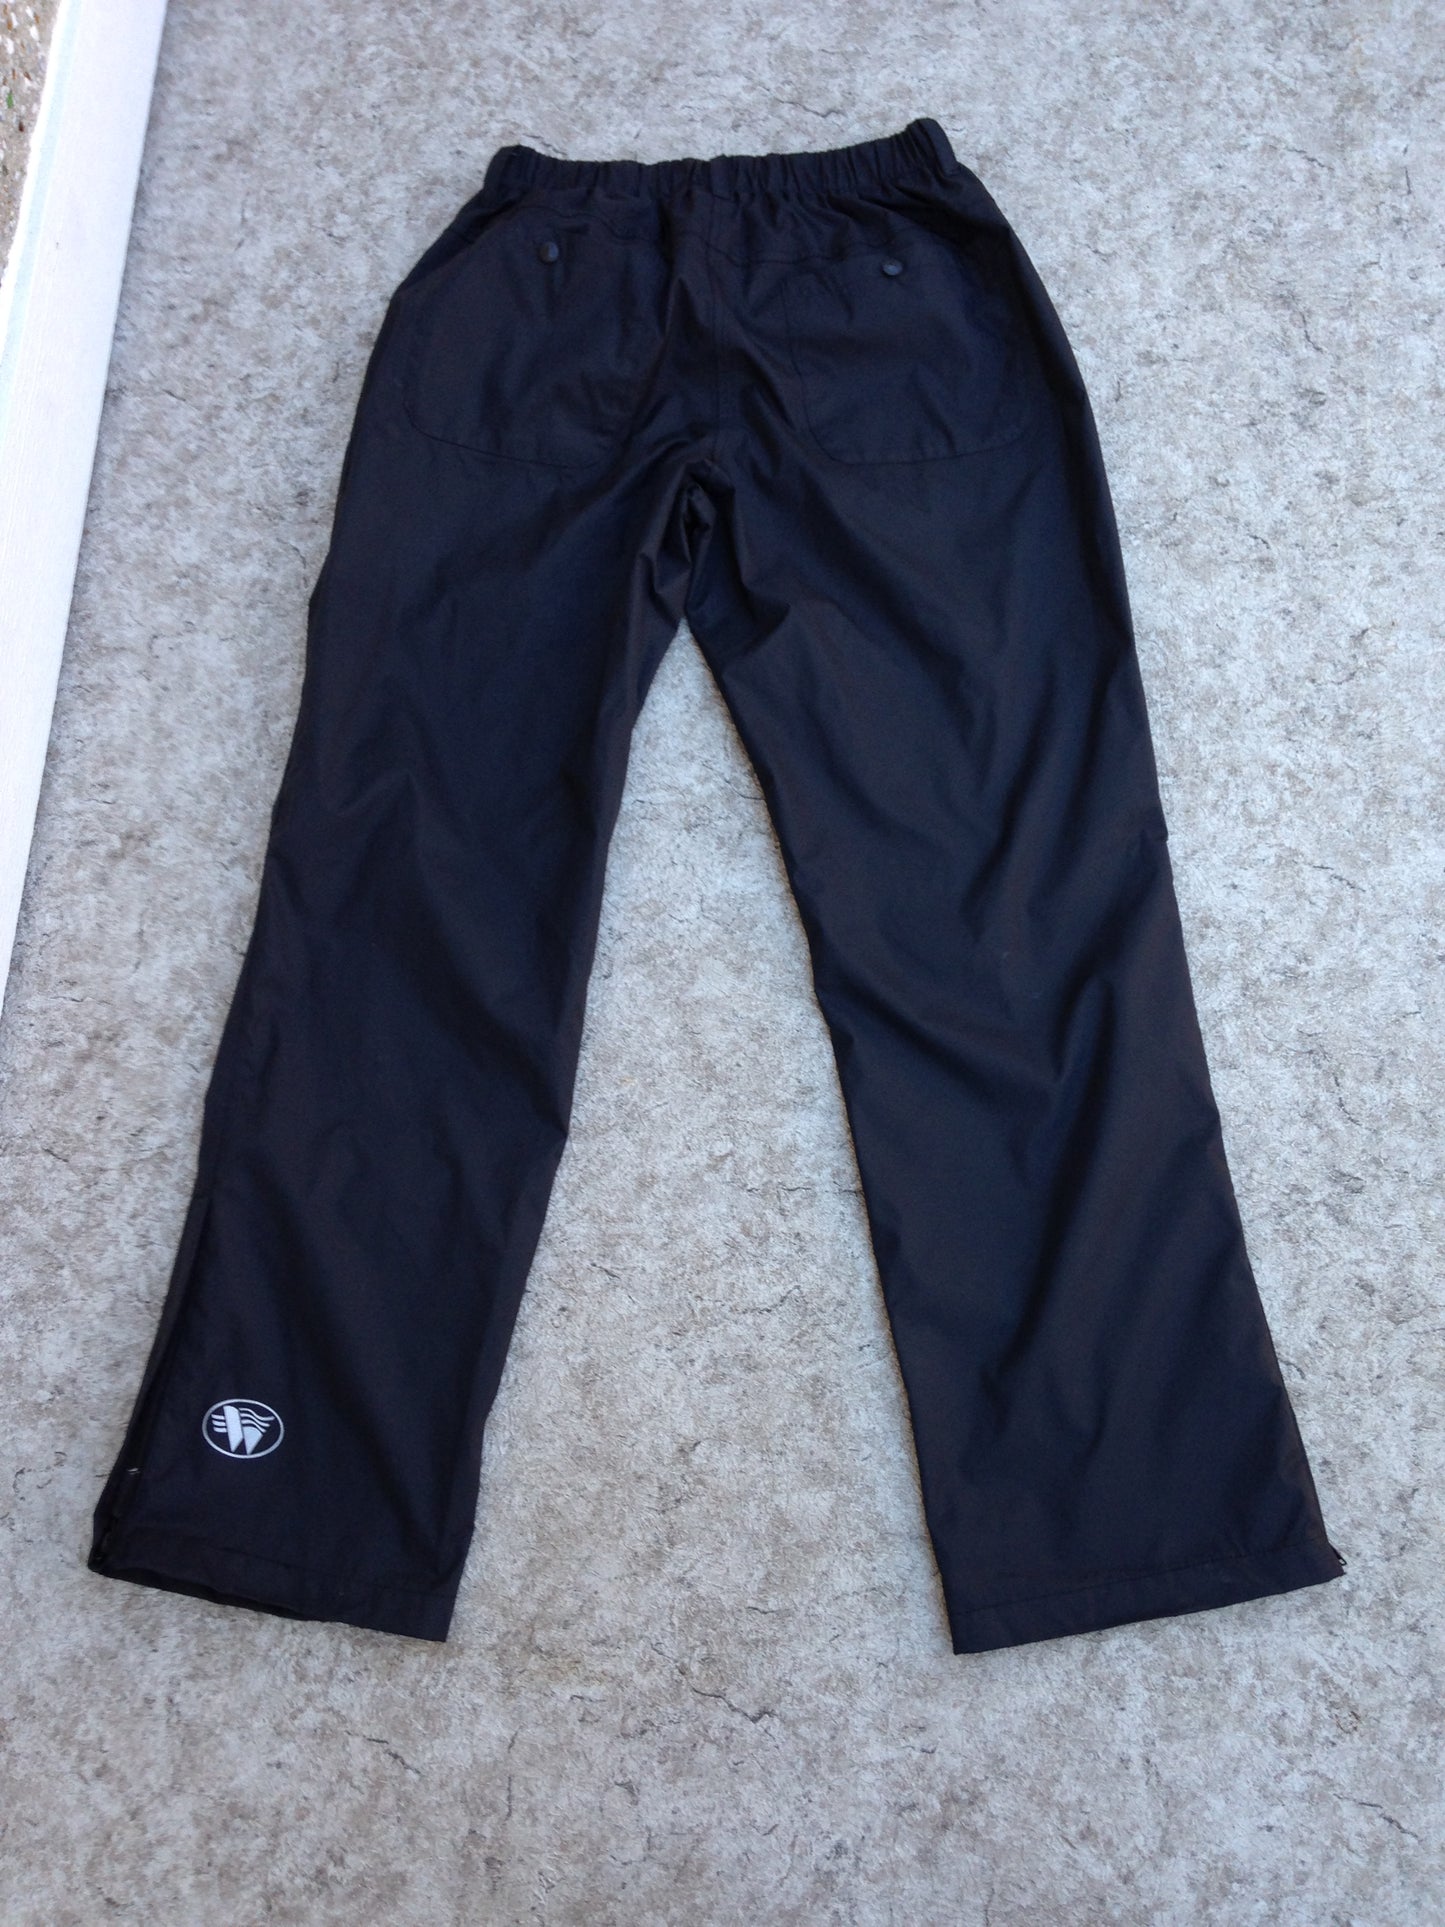 Rain Pants Ladies Size Large Black Waterproof Excellent Quality and Condition